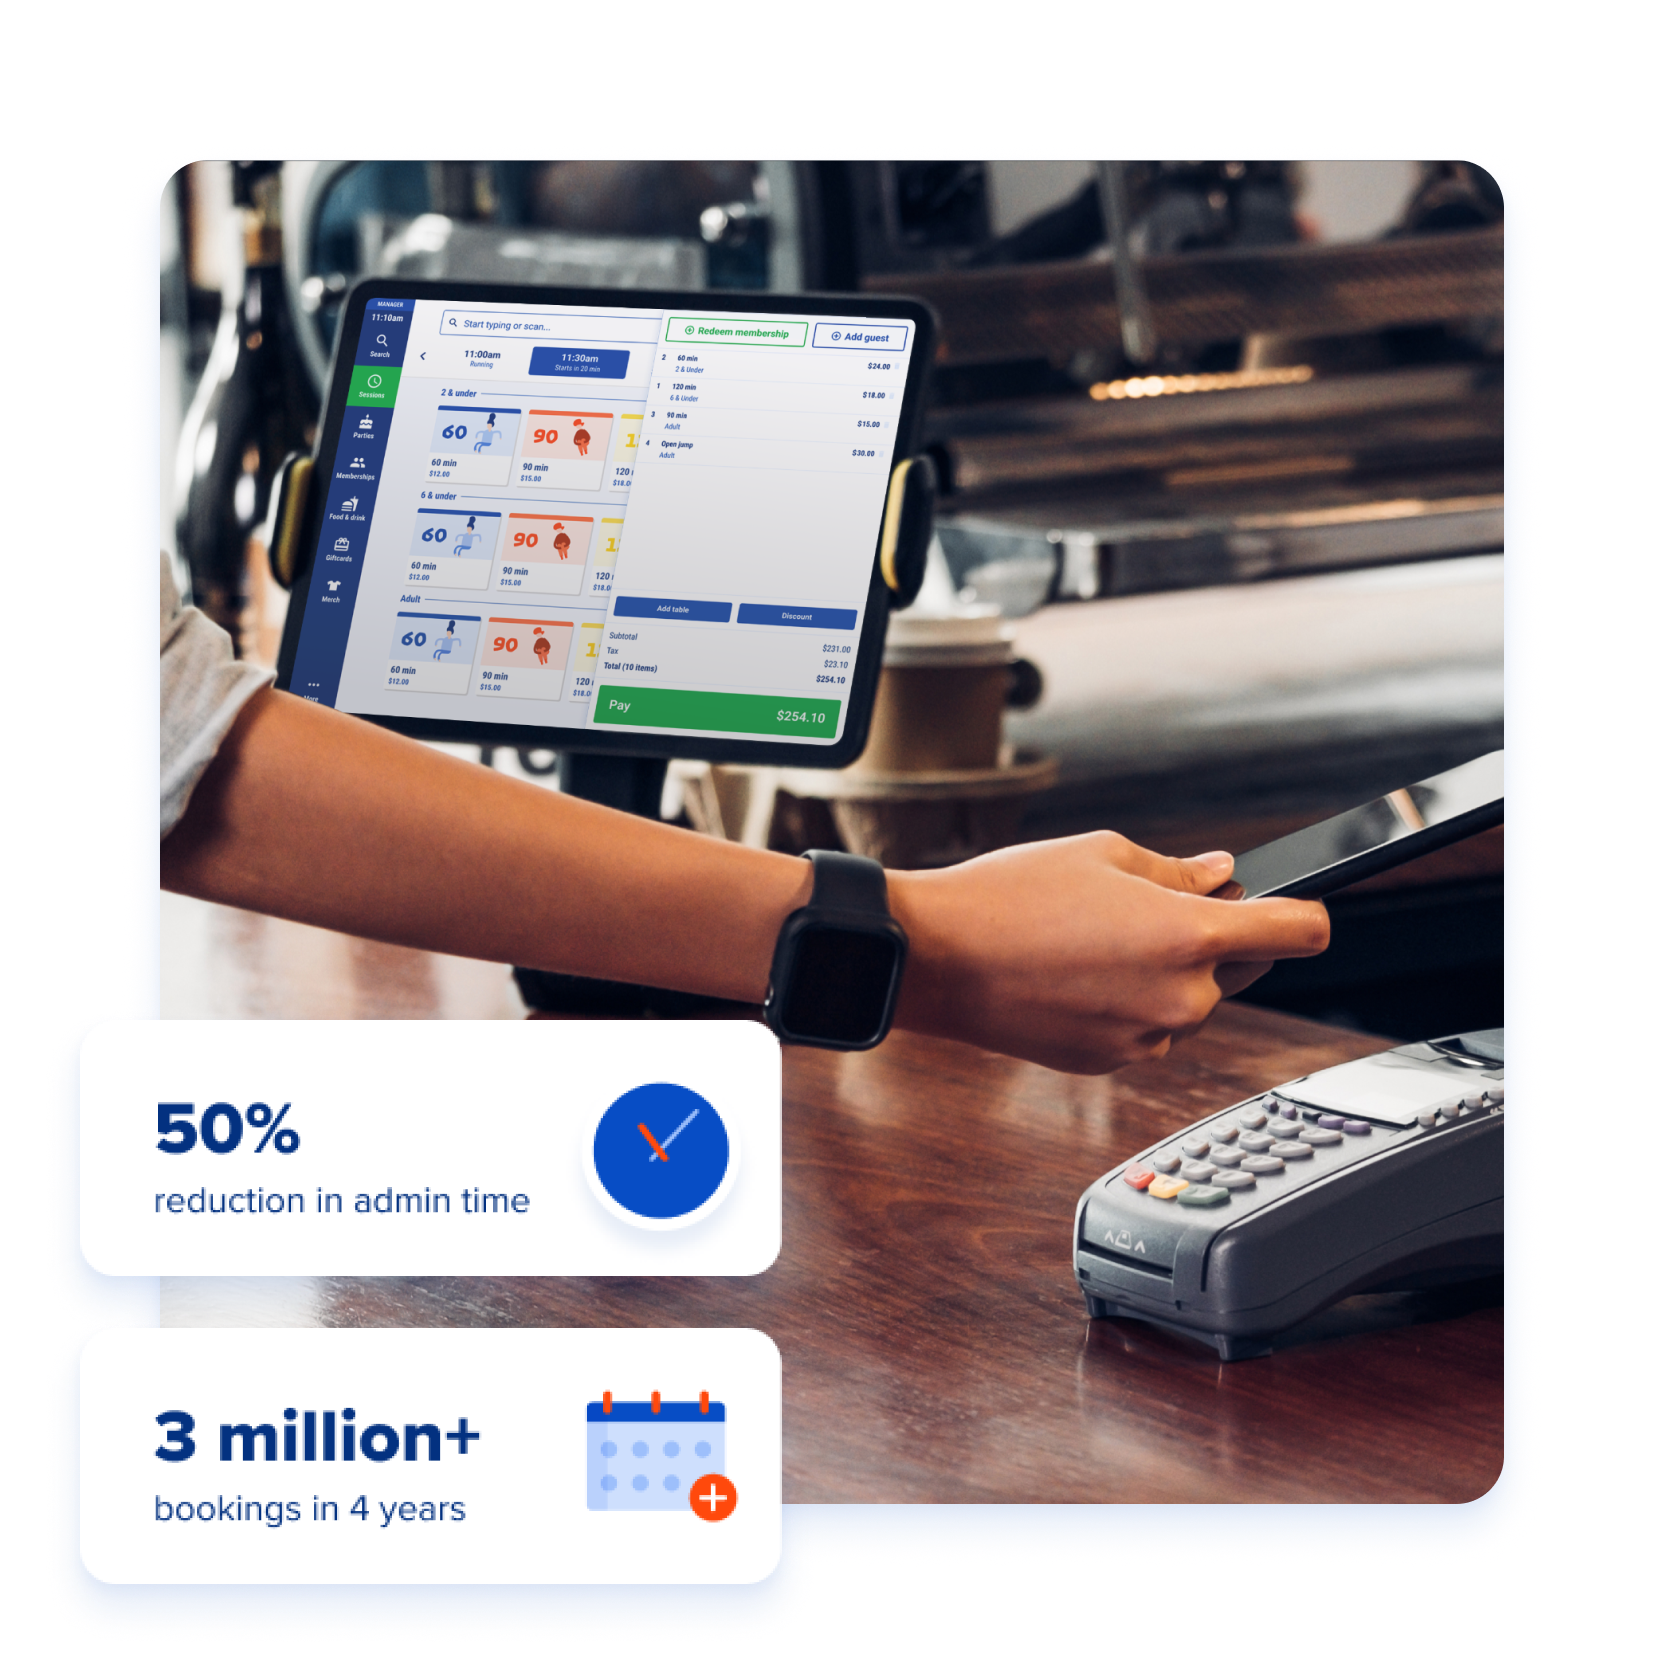 Intuitive POS to increase conversion and reduce costs